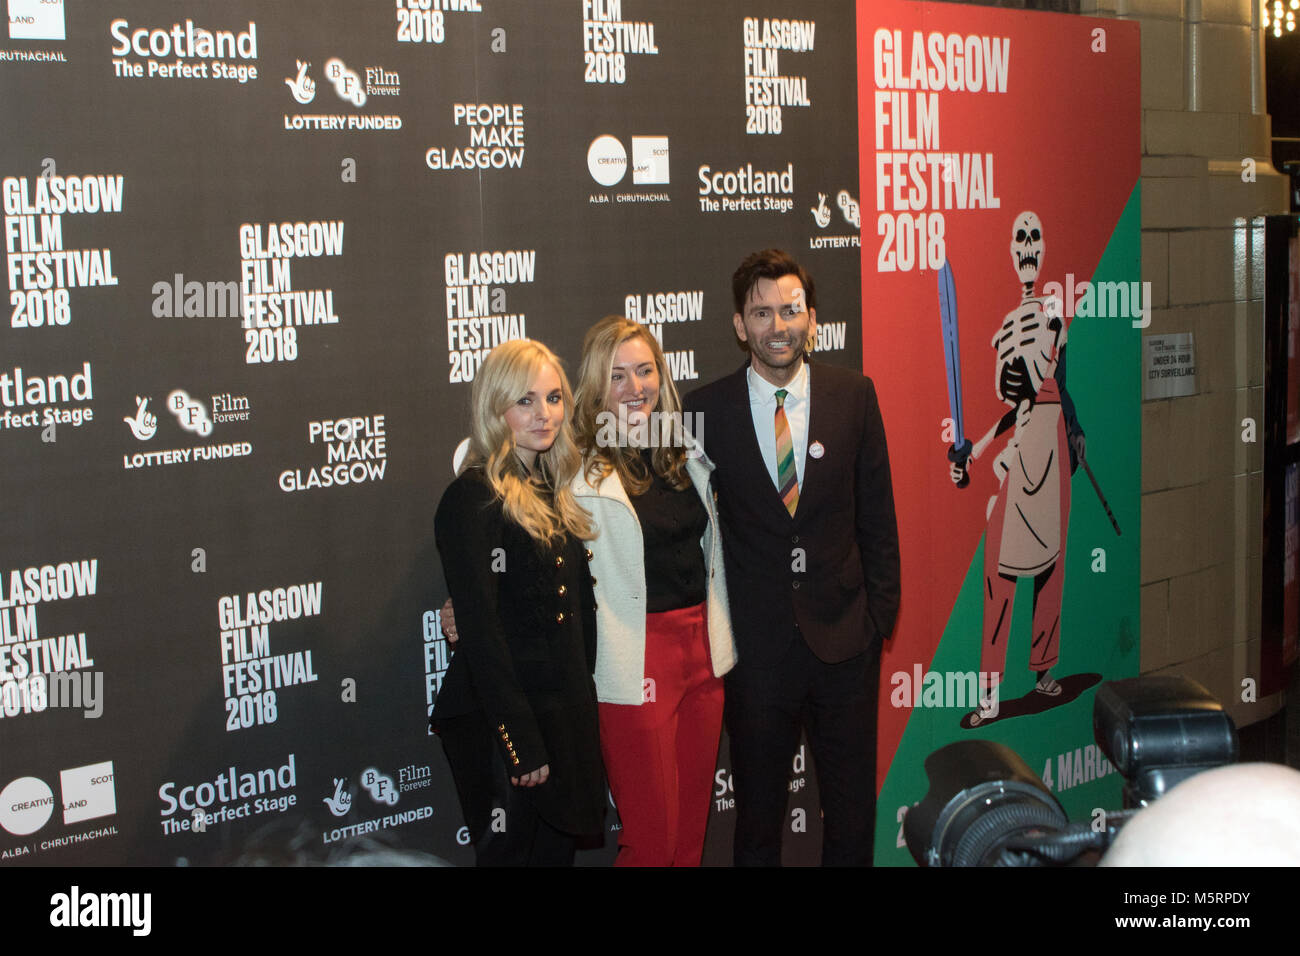 Glasgow, Scotland, UK. 25th February, 2018. Actor, David Tennant on the red carpet, with Georgia Moffett (Producer) and Daisy Aitkens (Director), at a photo call for the European film premiere of You, Me and Him, at the Glasgow Film Theatre (GFT), Scotland. You, Me and Him is 'a fizzy Bridget-Jones-style romp,' and co-starring are Faye Marsay and Lucy Punch. This screening is part of the Local Heroes strand at the Glasgow Film Festival 2018 (GFF), which runs until 4th March, 2018. Iain McGuinness / Alamy Live News Stock Photo